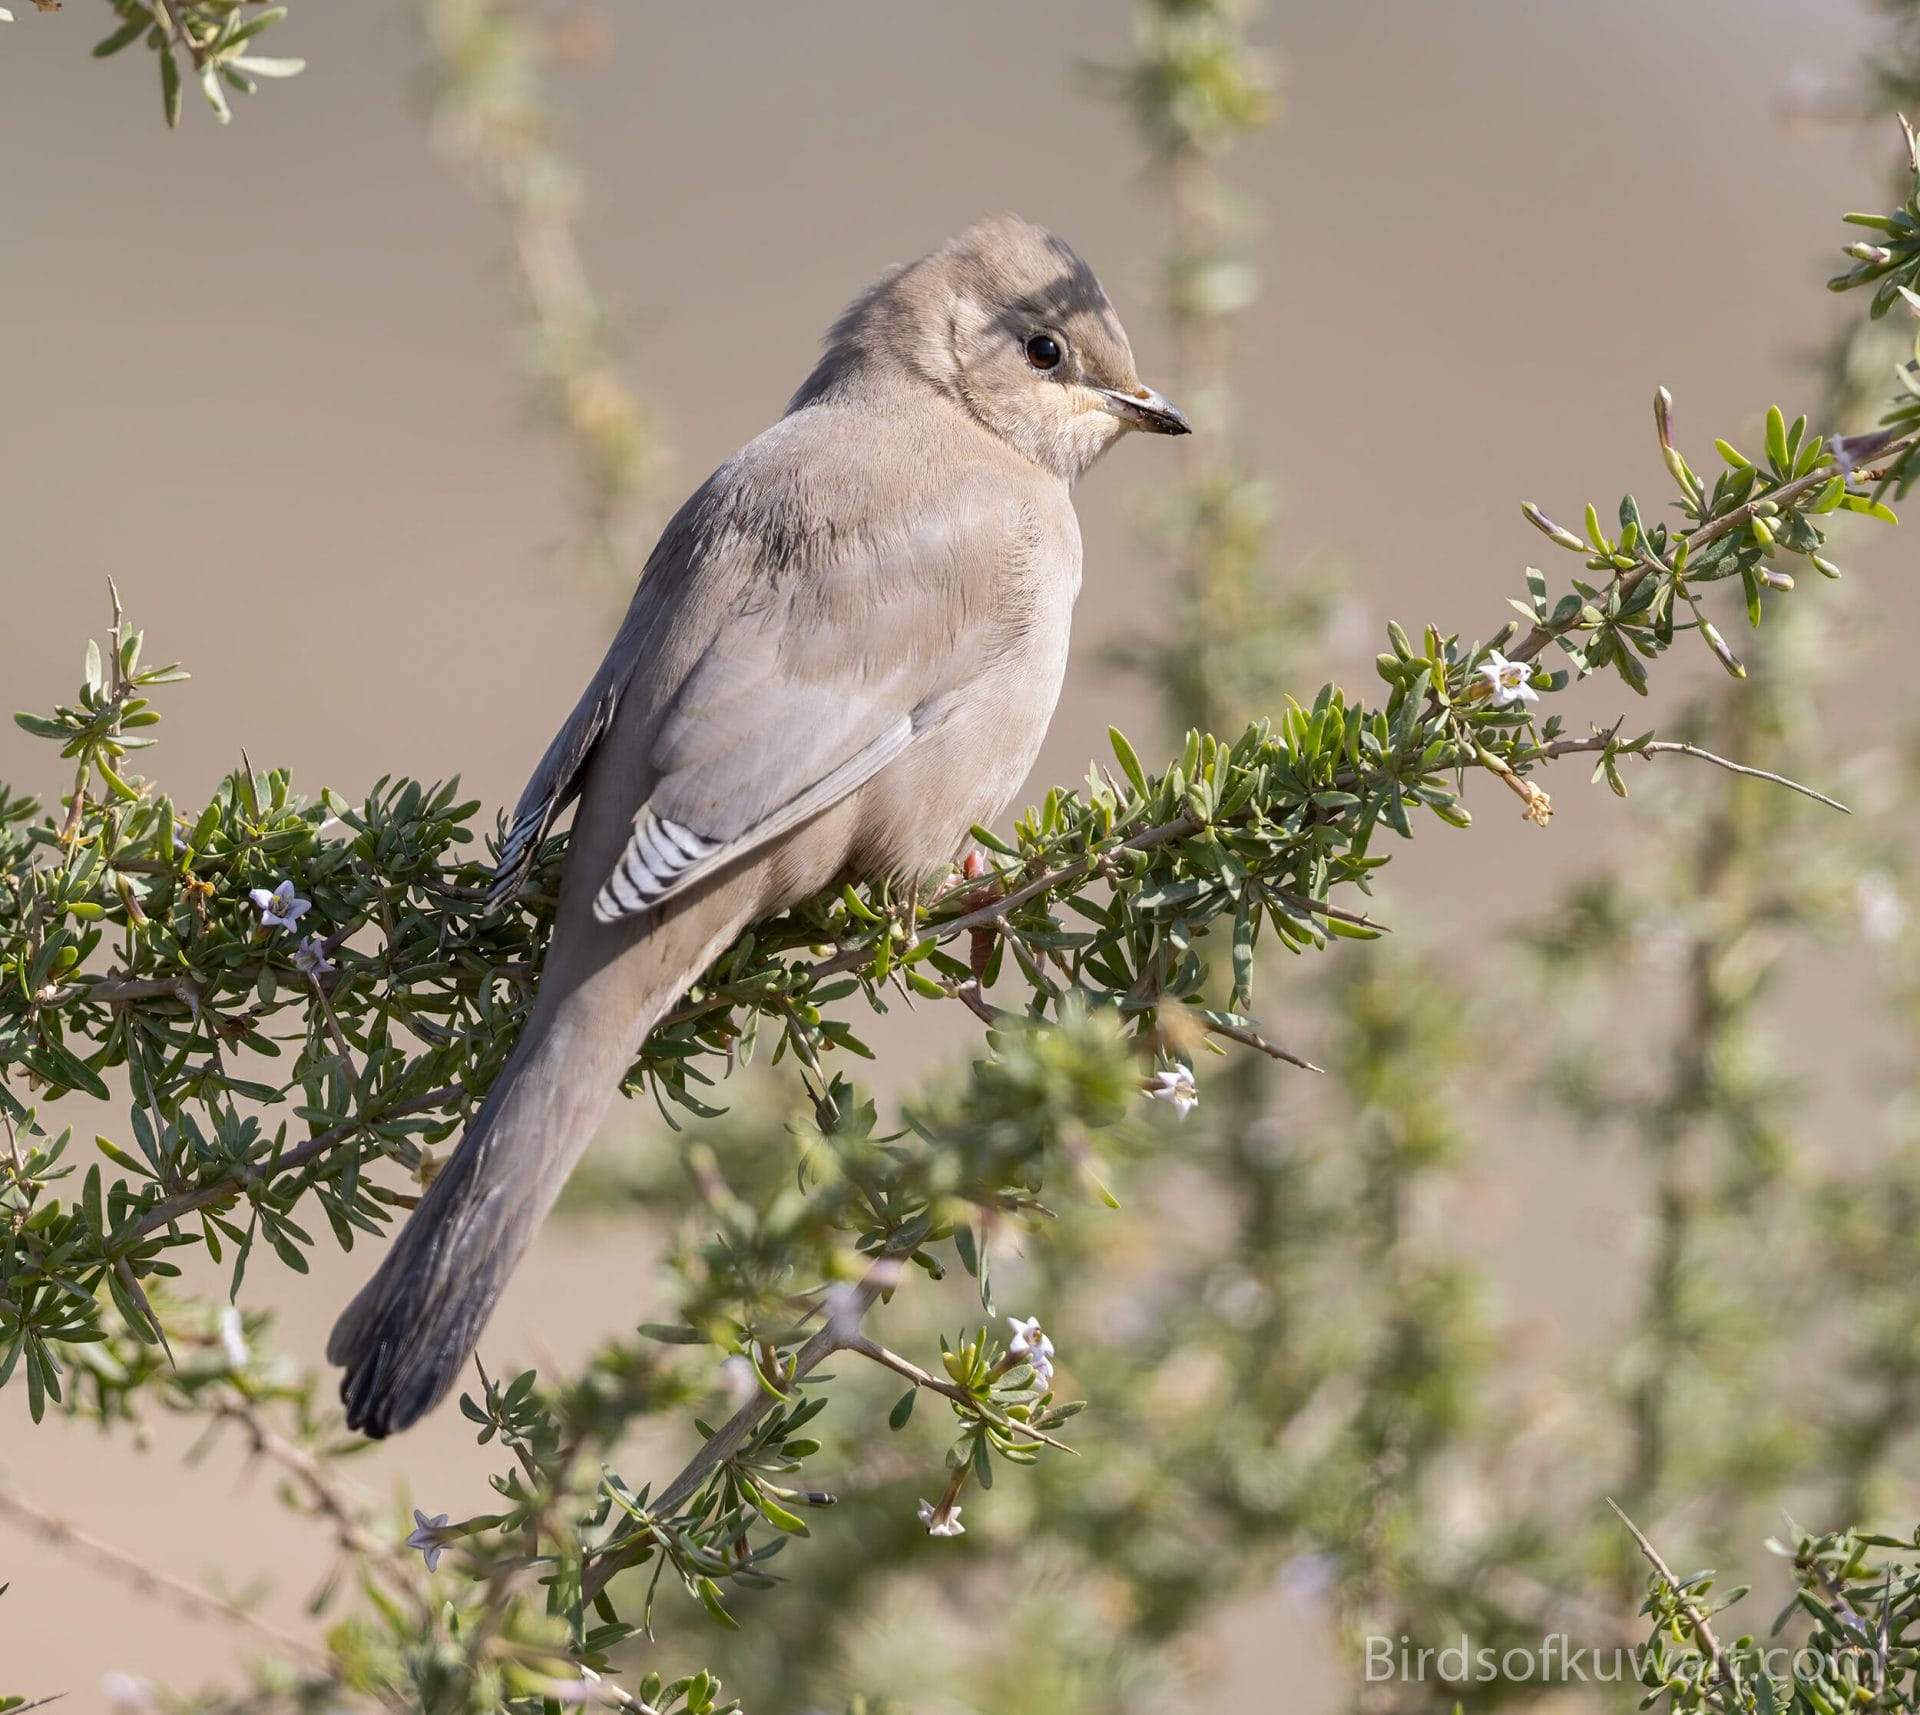 The Hypocolius is one of the target species from Kuwait Bird List for Kuwait Birdwatching Tours